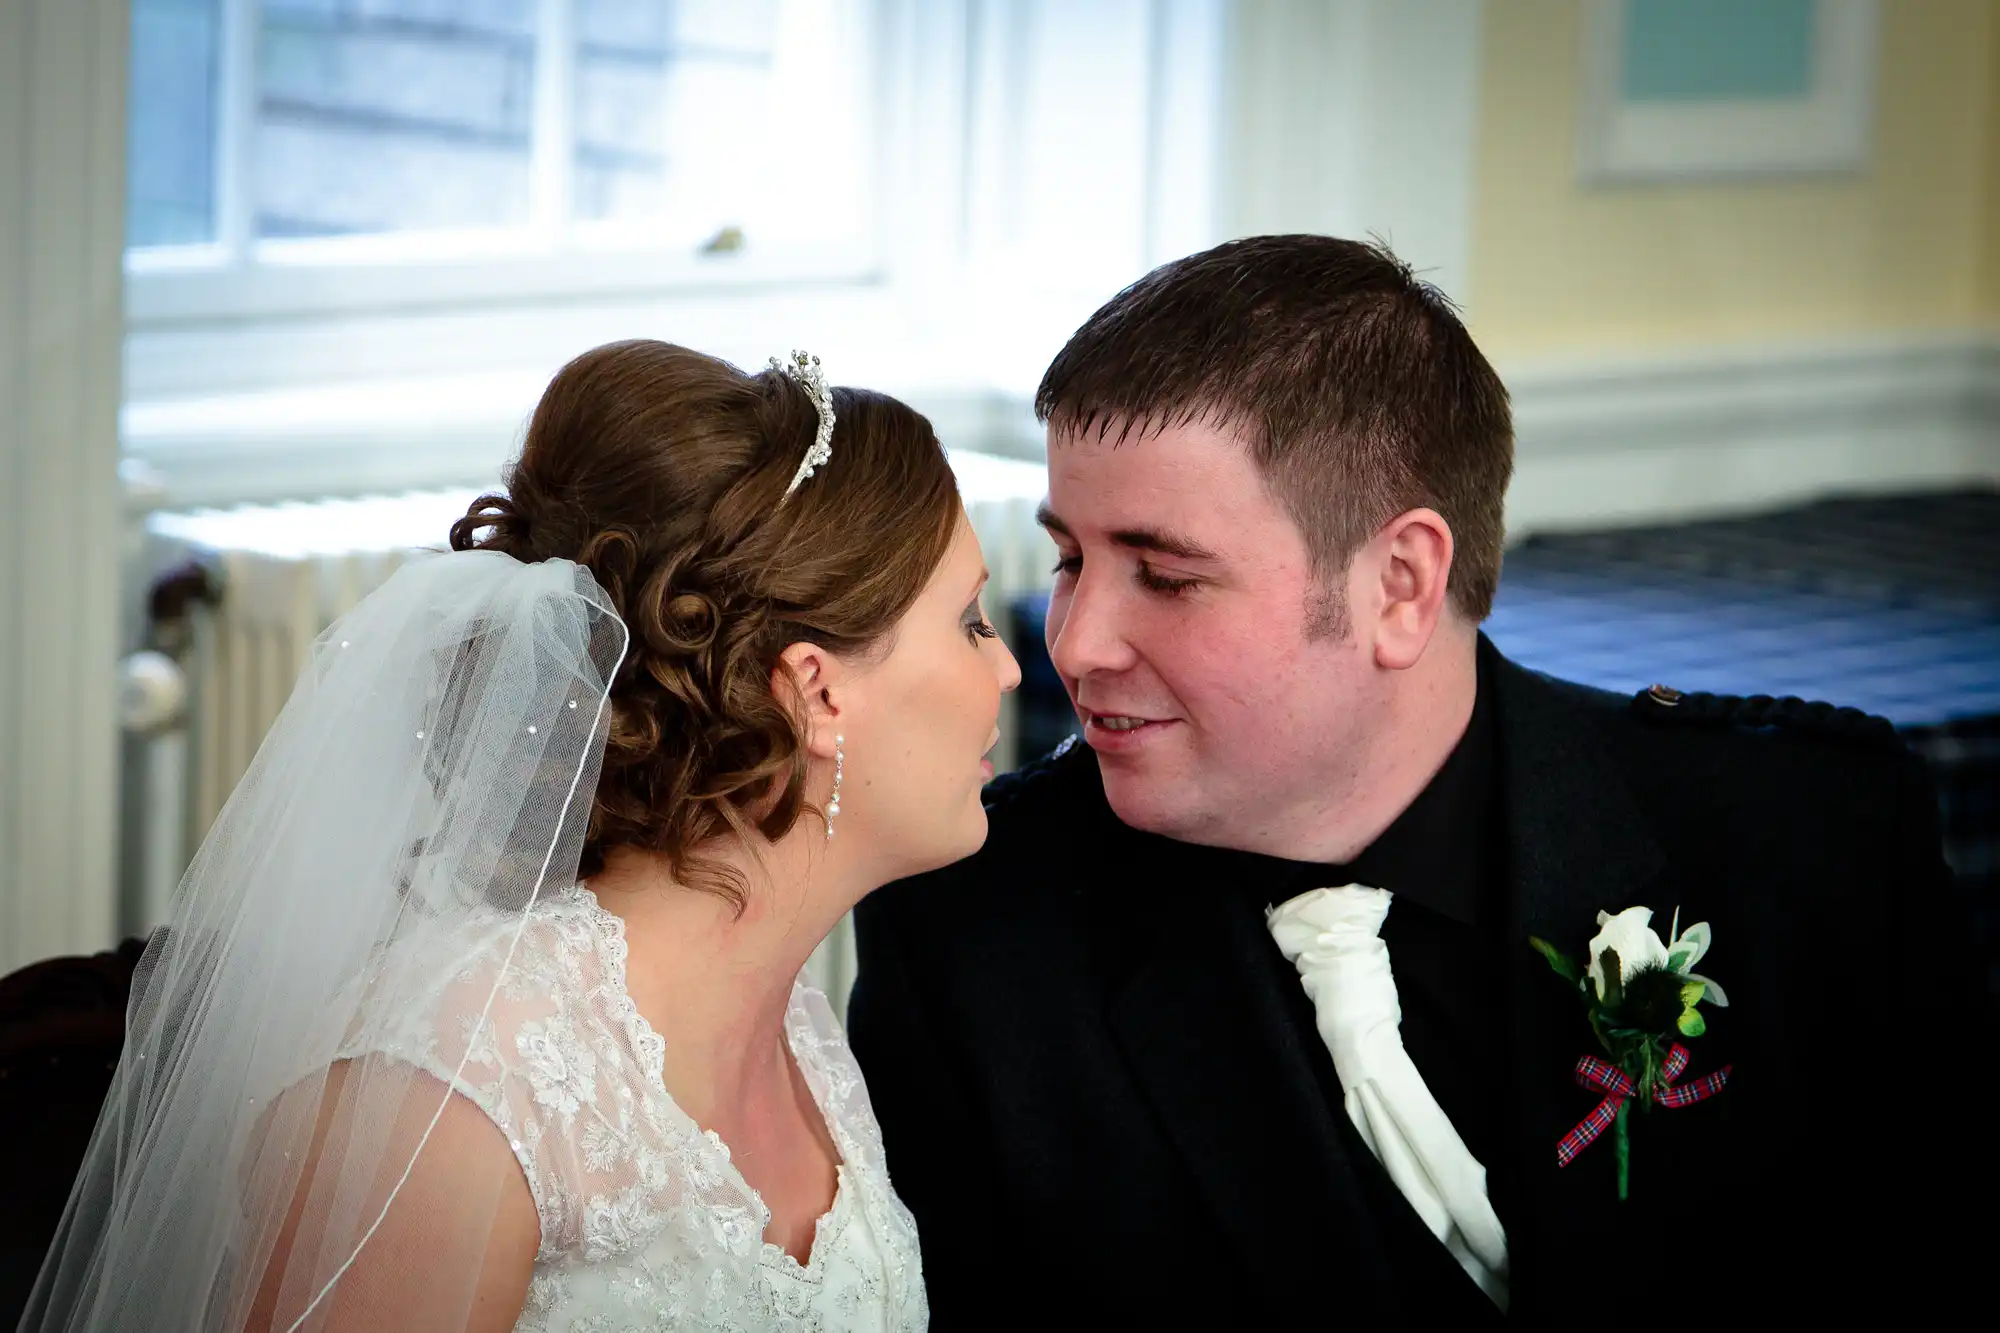 A bride and groom in wedding attire, sharing a tender moment, leaning close to each other with joyful expressions.